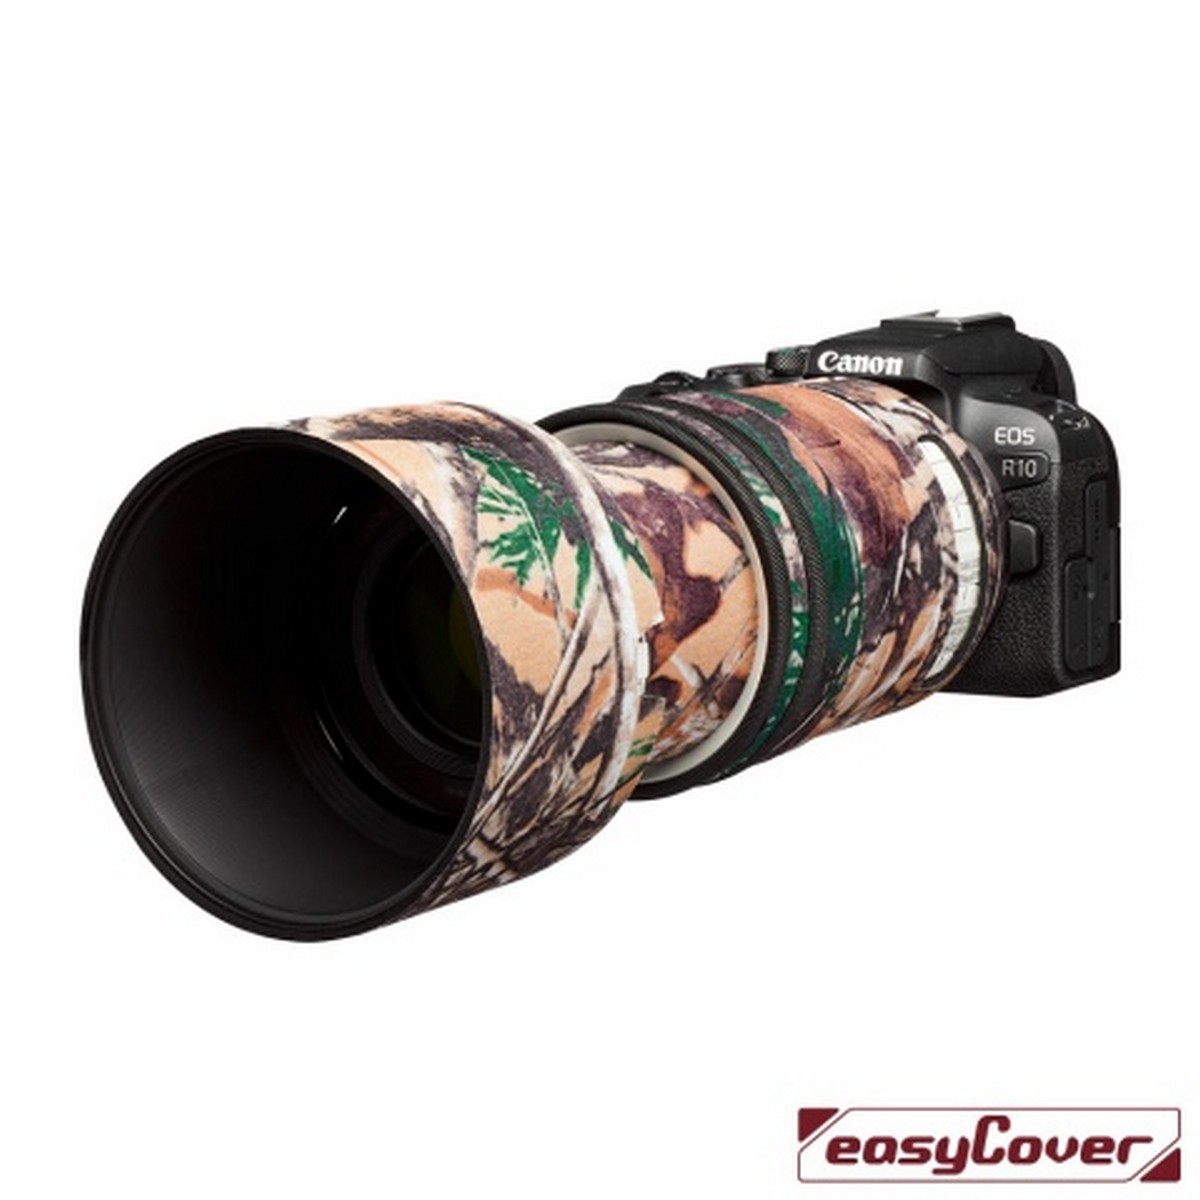 Easycover Lens Oak für Canon RF 70-200 mm 1:4L IS USM Forest Camouflage